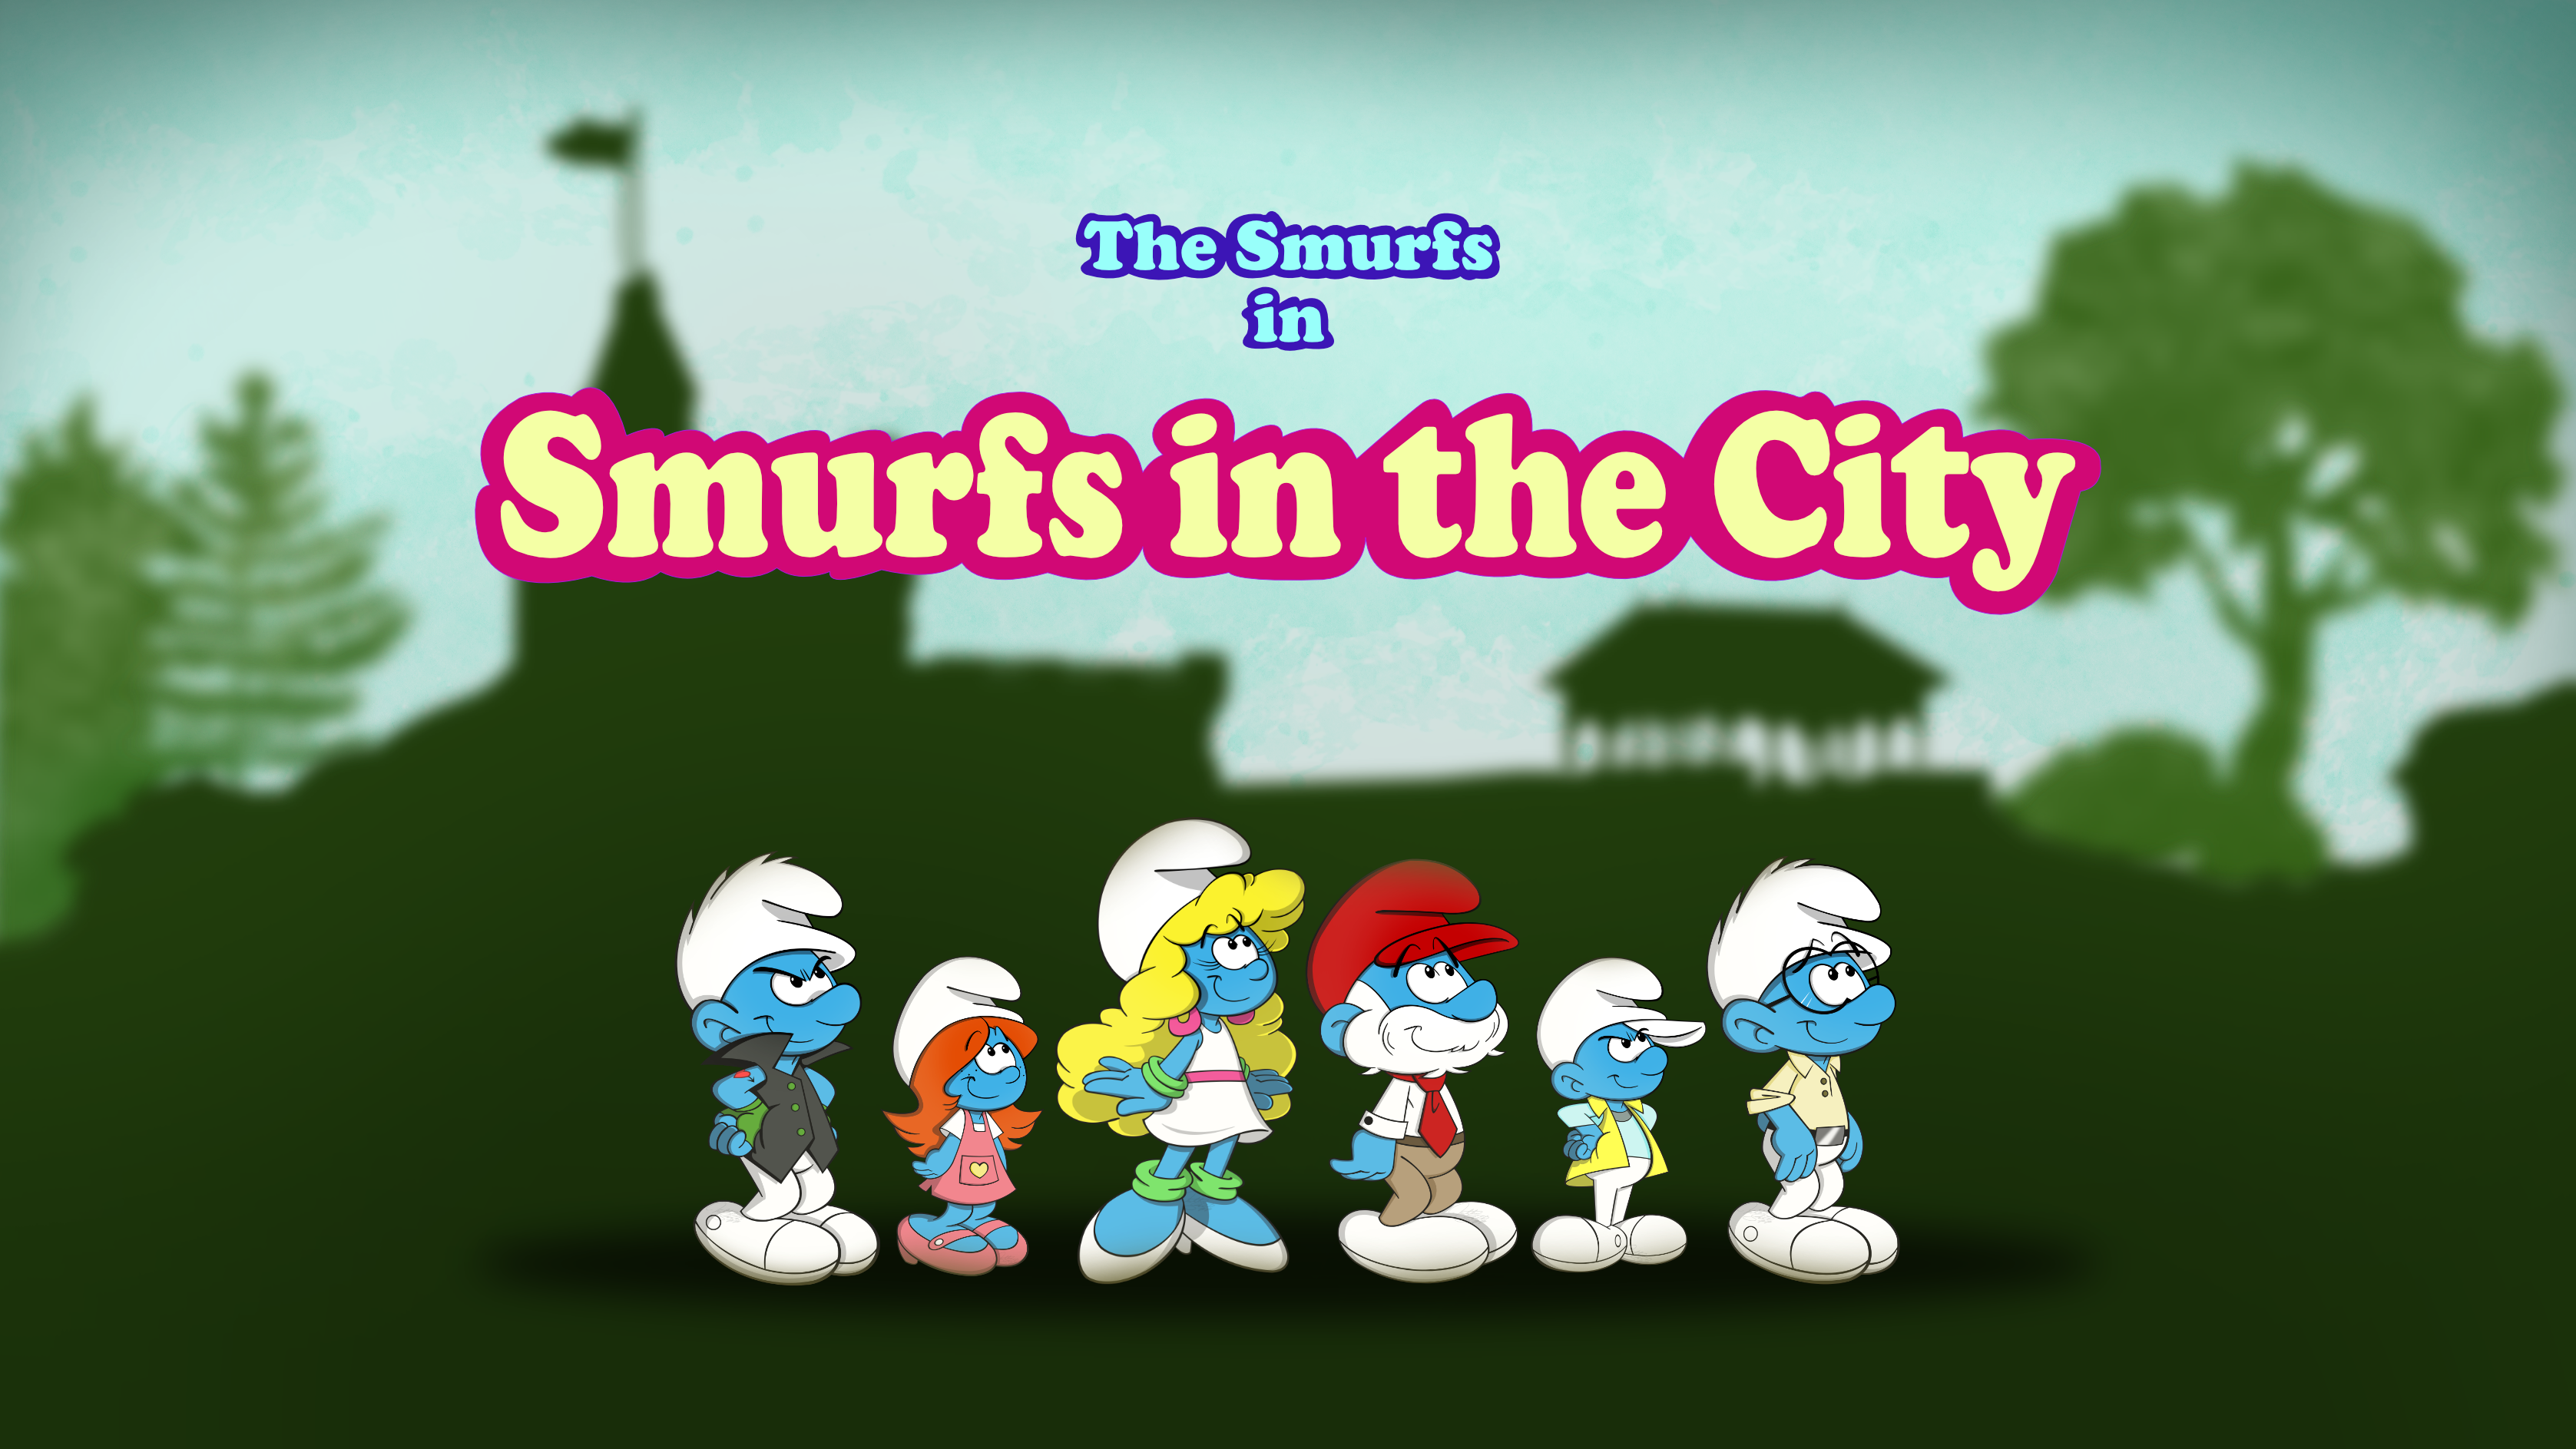 Smurf Means - Comic Watch